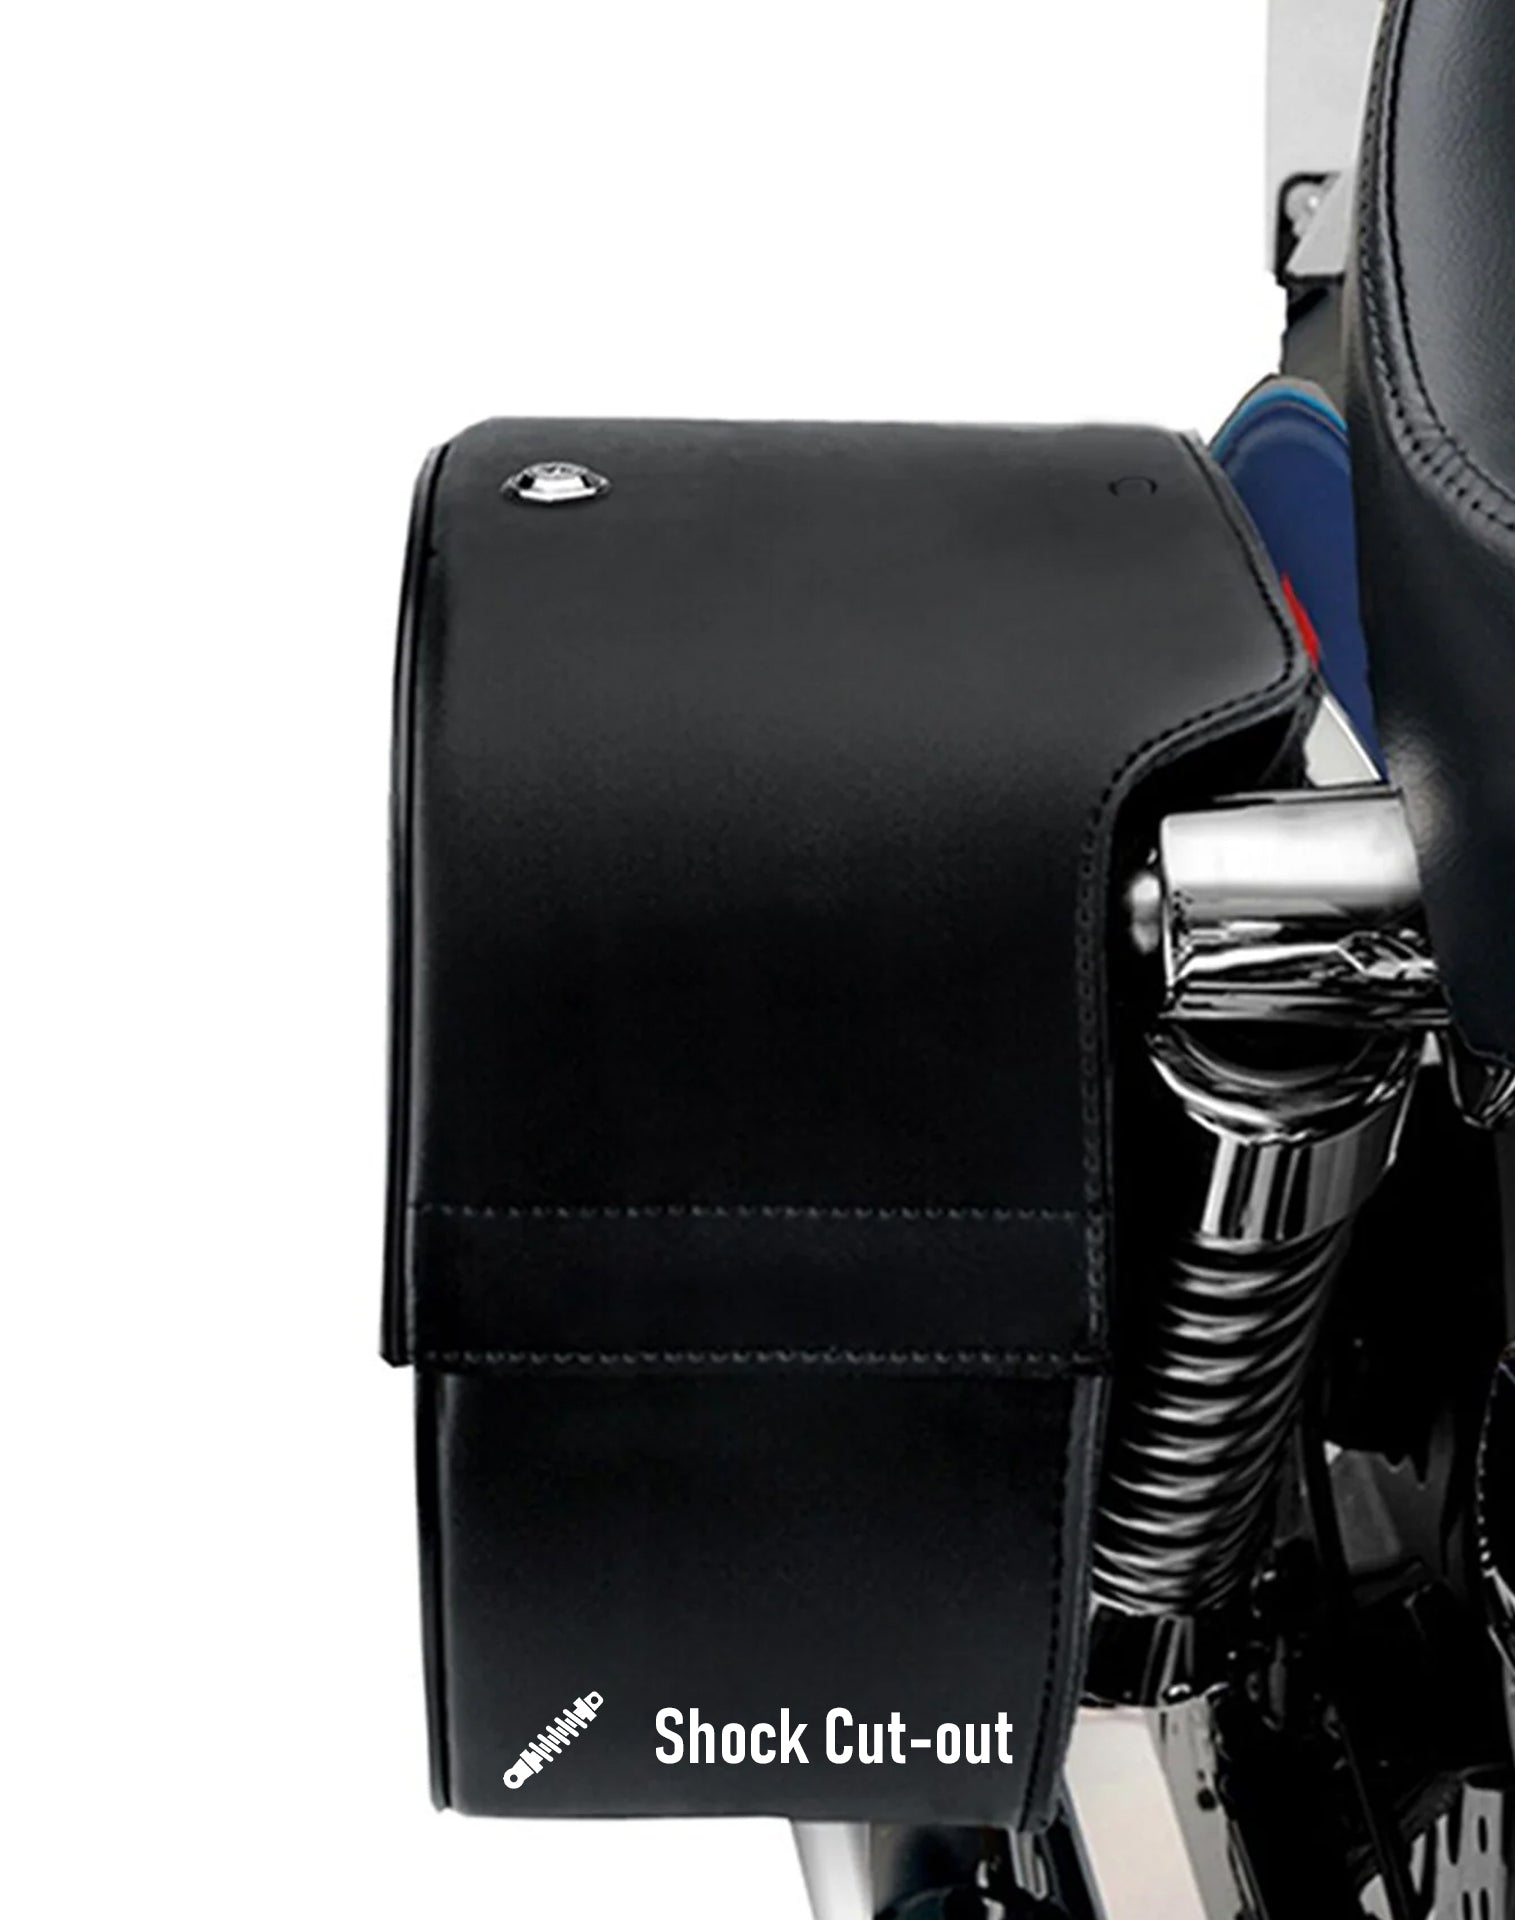 Viking Warrior Large Shock Cut Out Leather Motorcycle Saddlebags For Harley Sportster 72 Xl1200V Hard Shell Construction